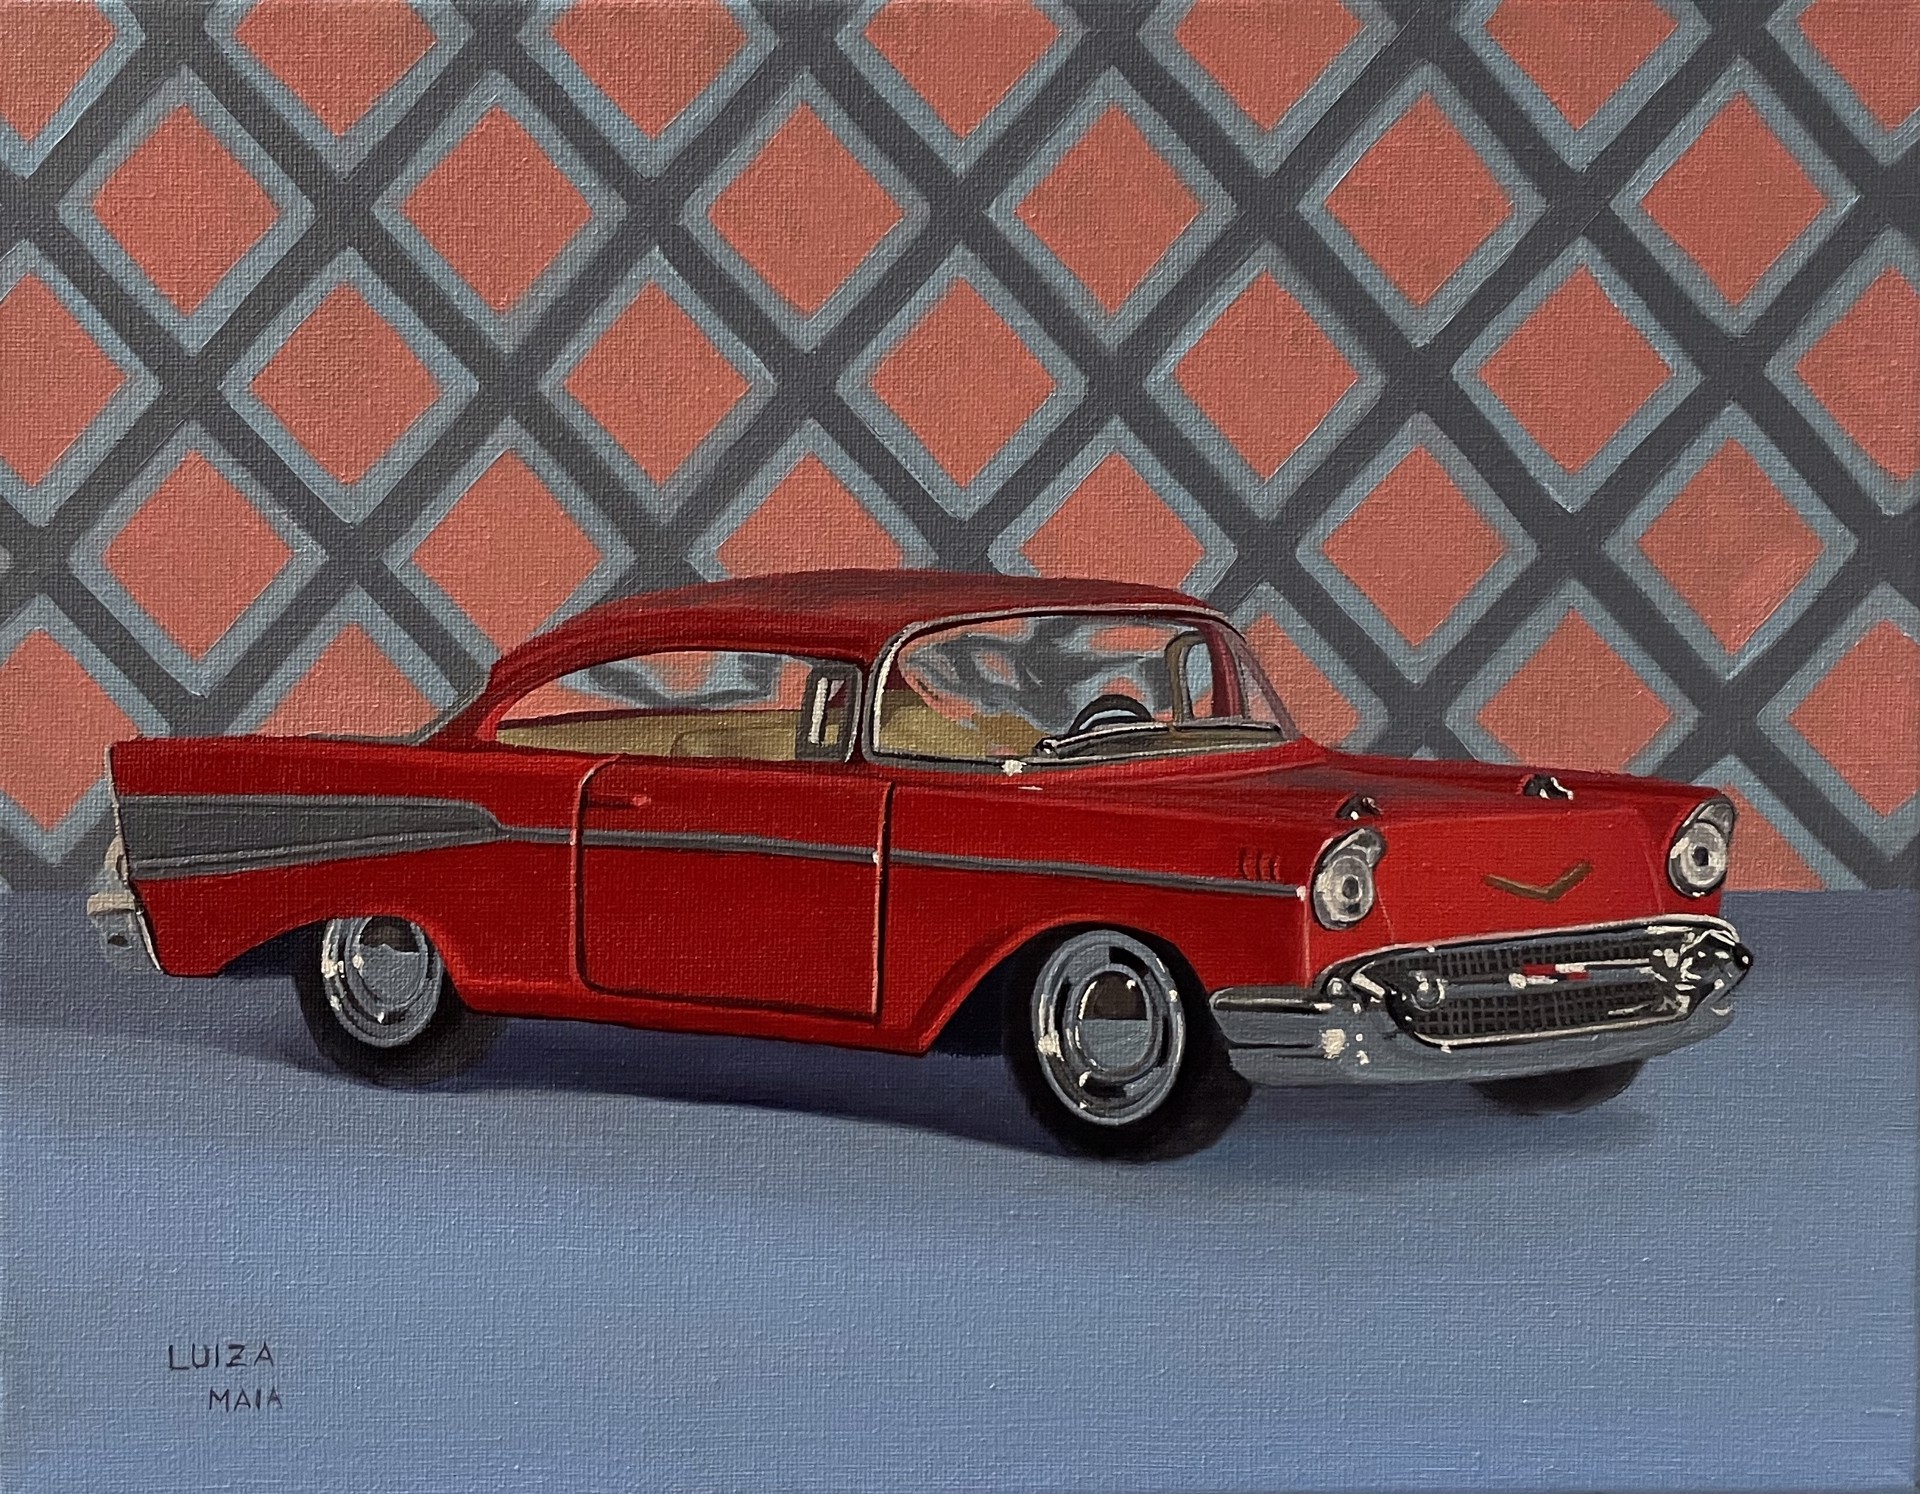 Chevy Bel Air by Luiza Maia